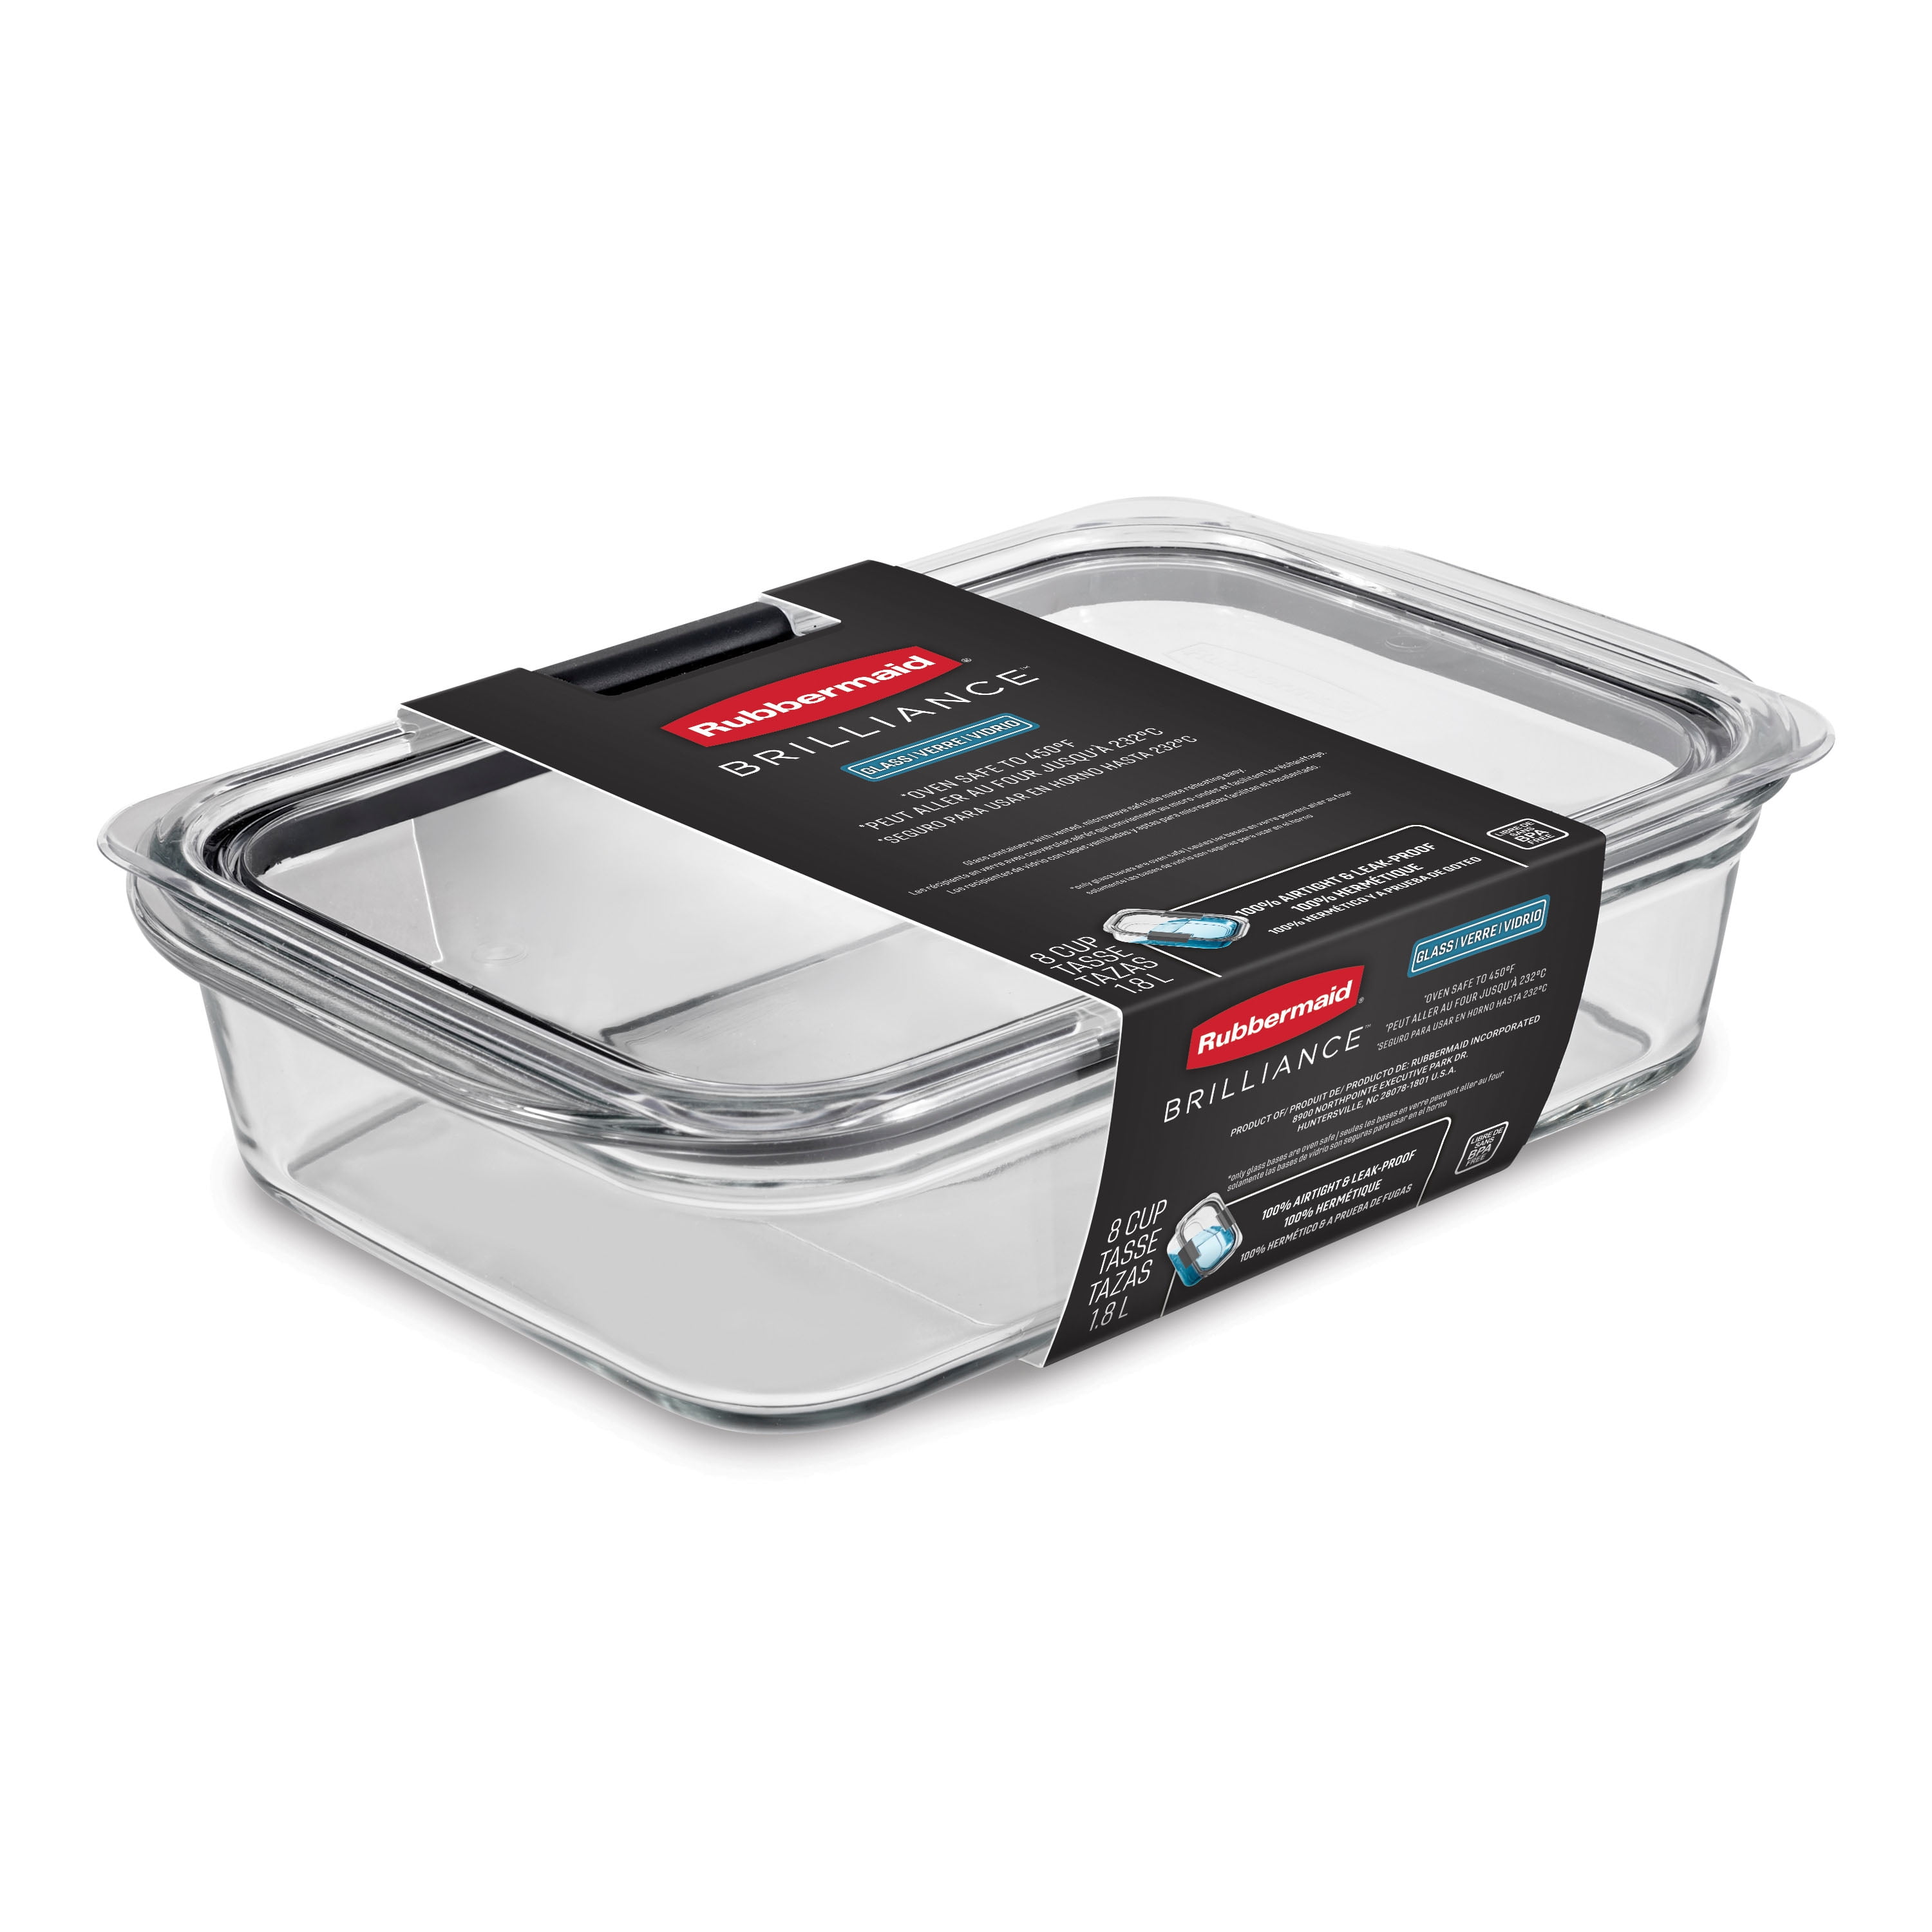  Rubbermaid Brilliance Food Storage Containers, Set of 8 -  Leakproof Glass Meal Prep Containers, Microwave & Oven Safe: Home & Kitchen